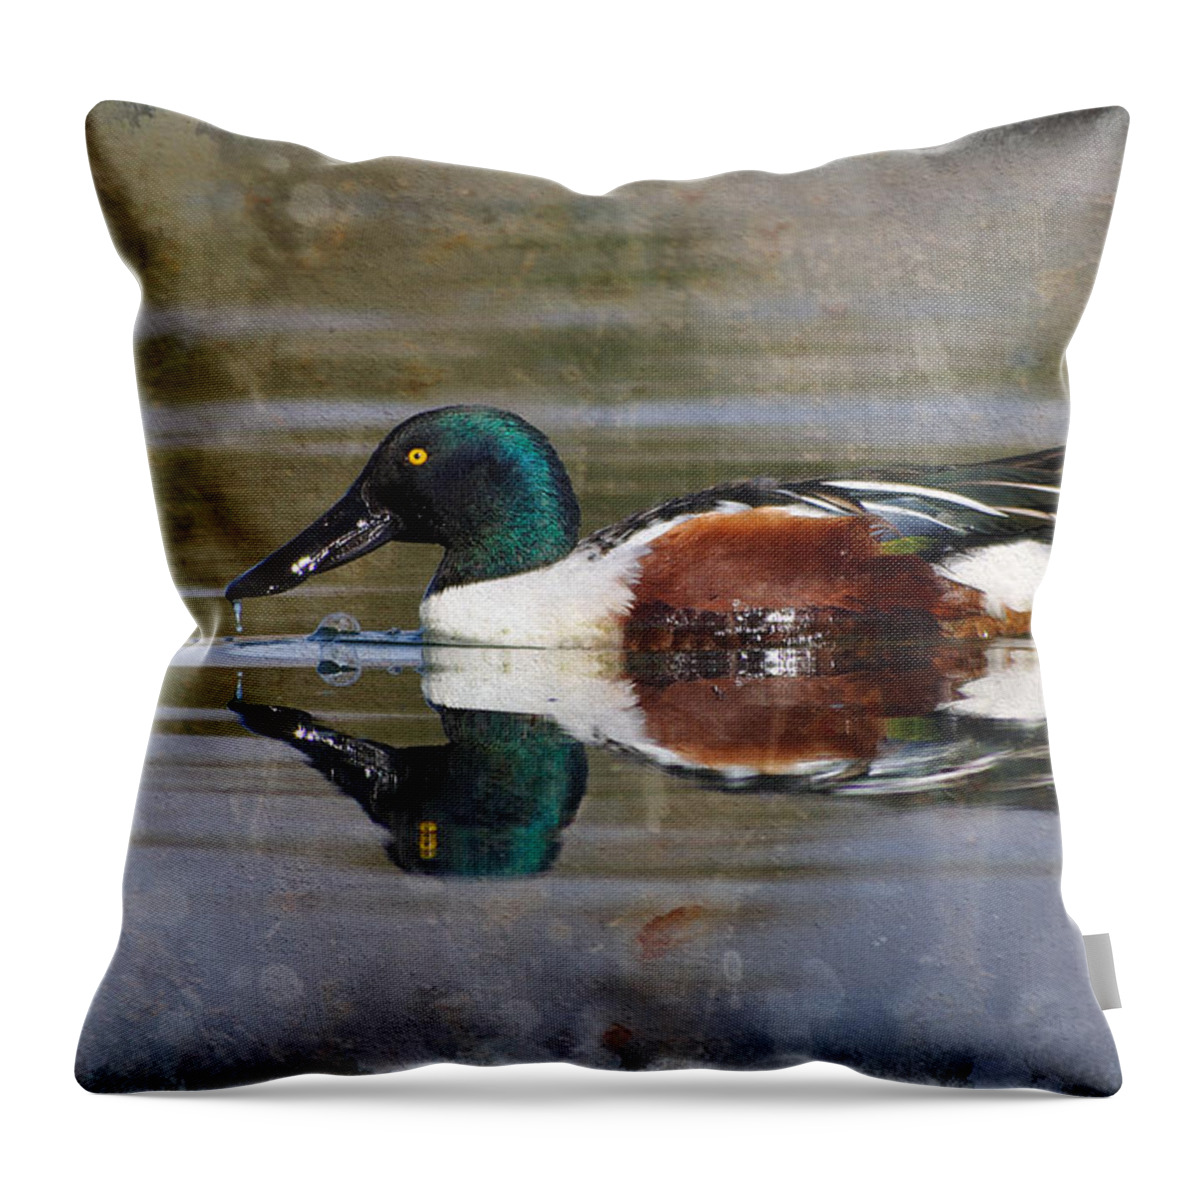 Animal Throw Pillow featuring the photograph Pochard by Perry Van Munster